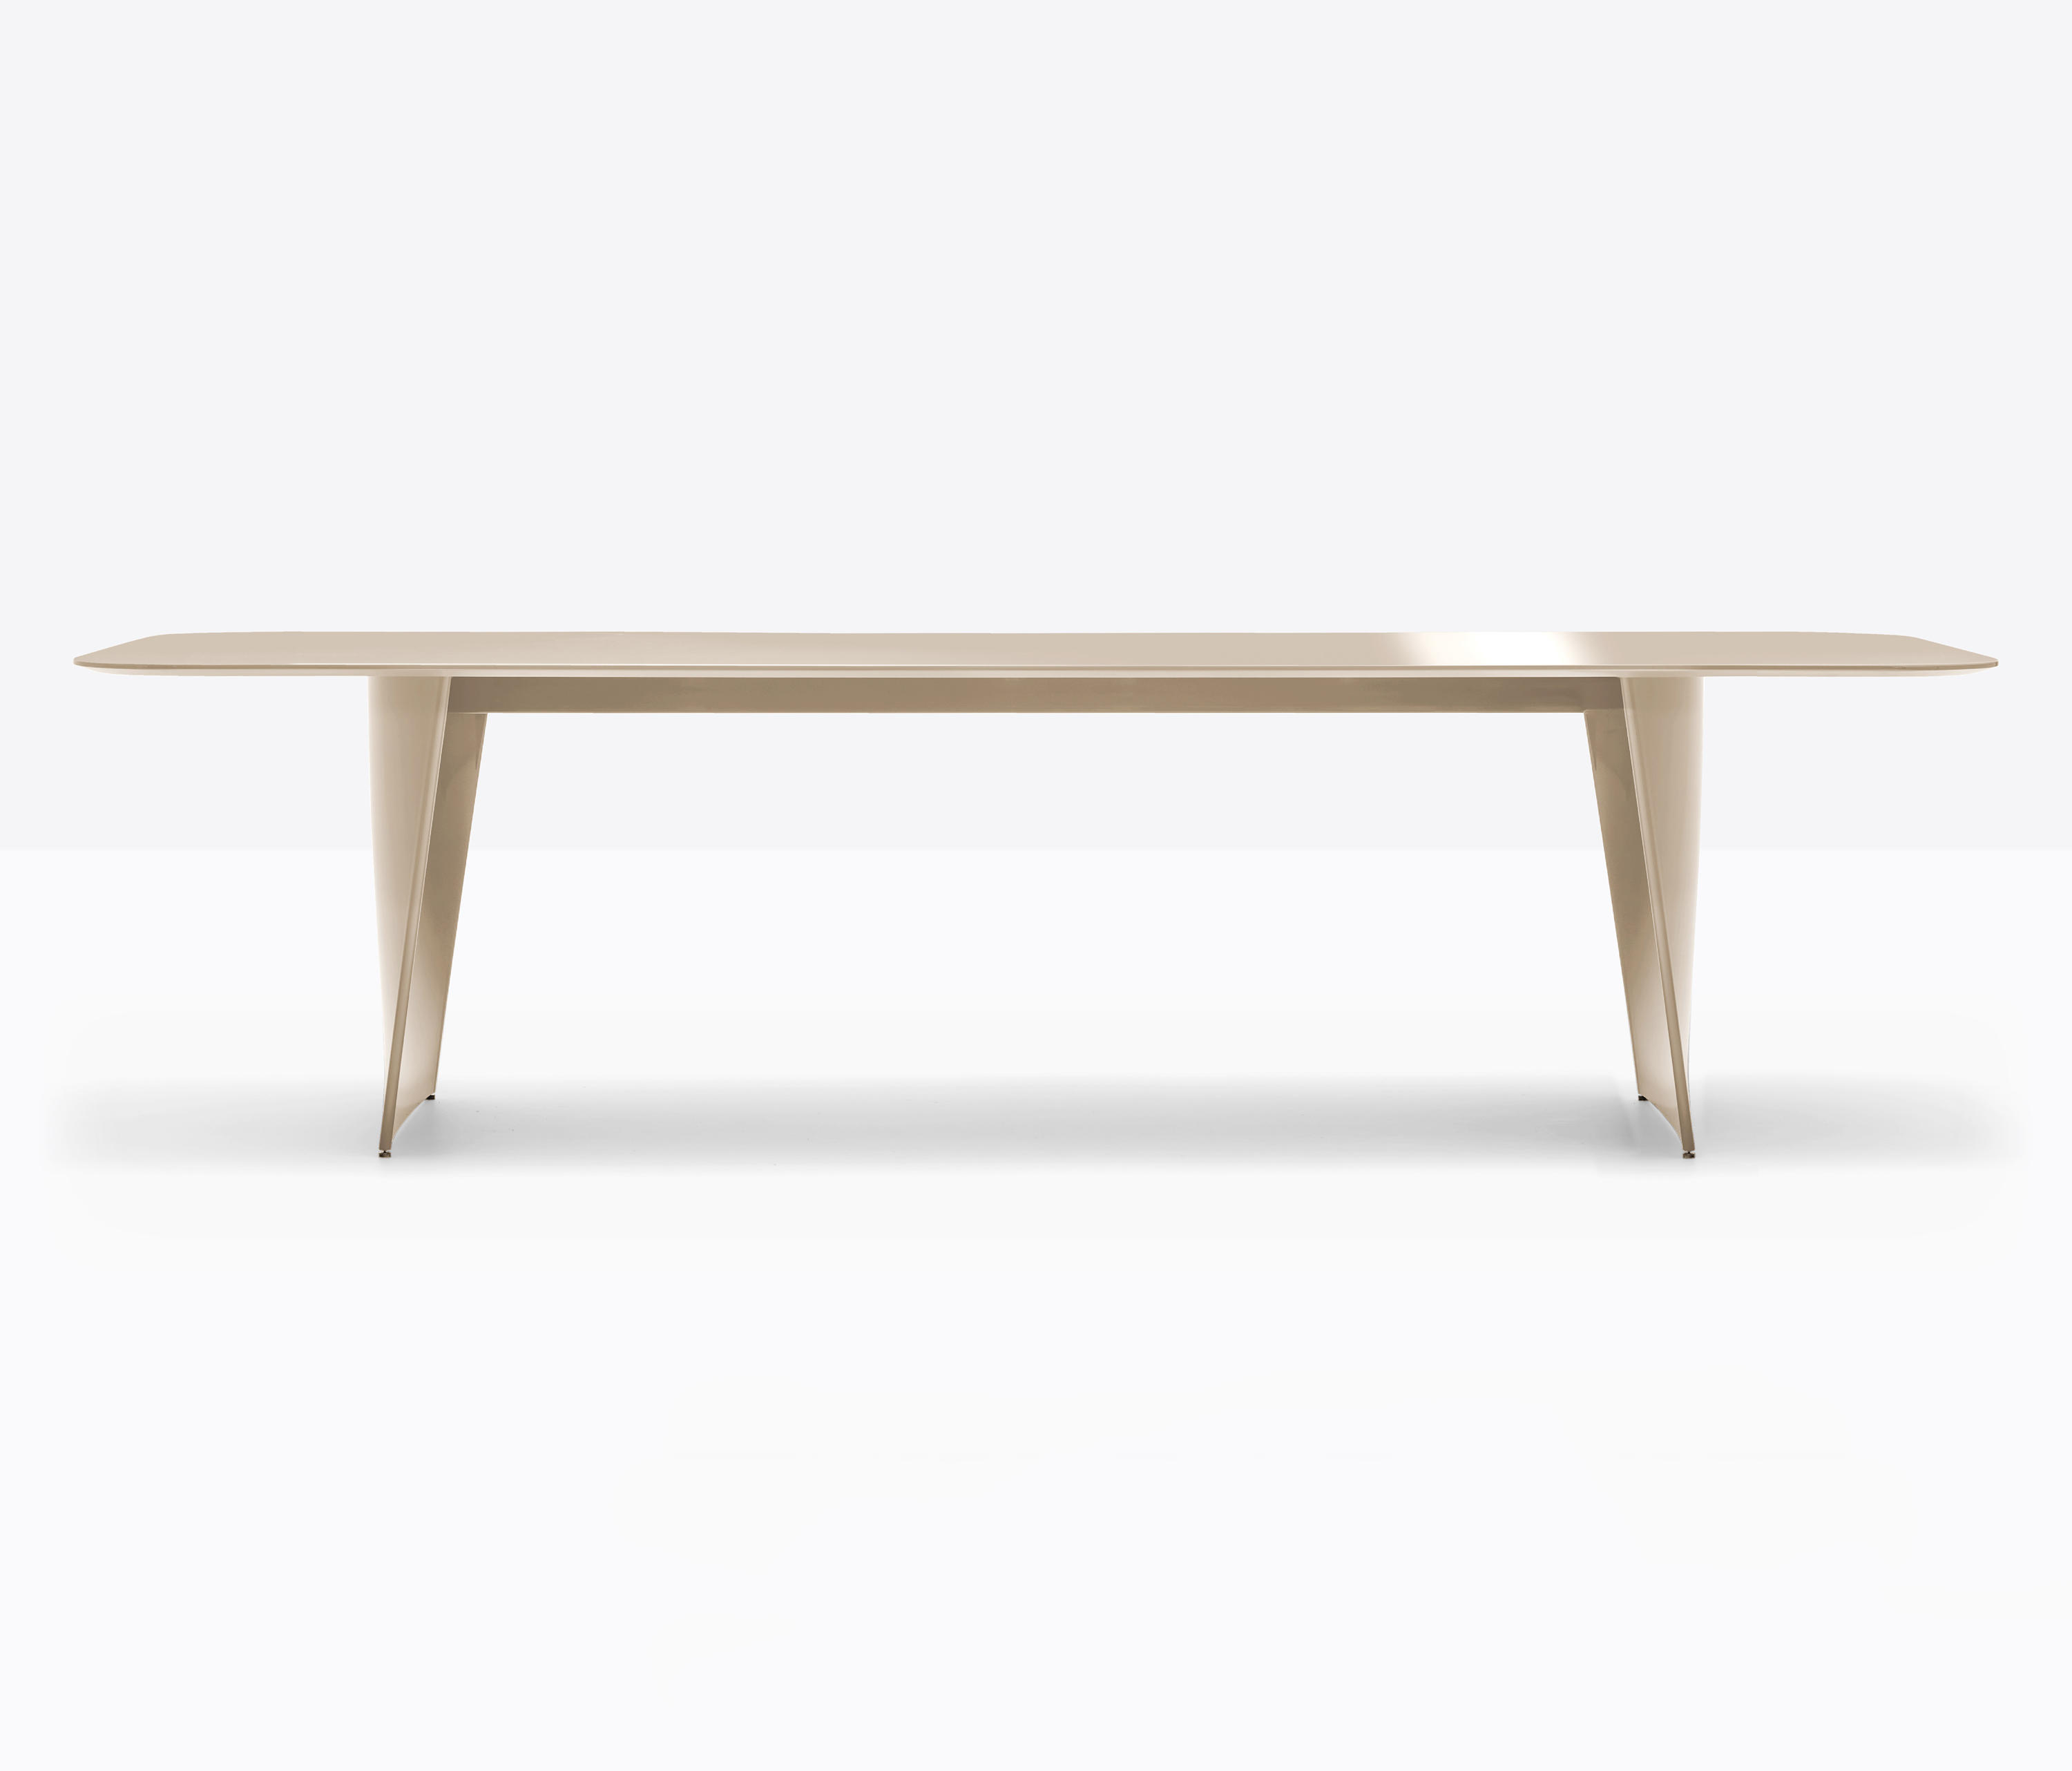 FRANK - Dining tables from PEDRALI | Architonic